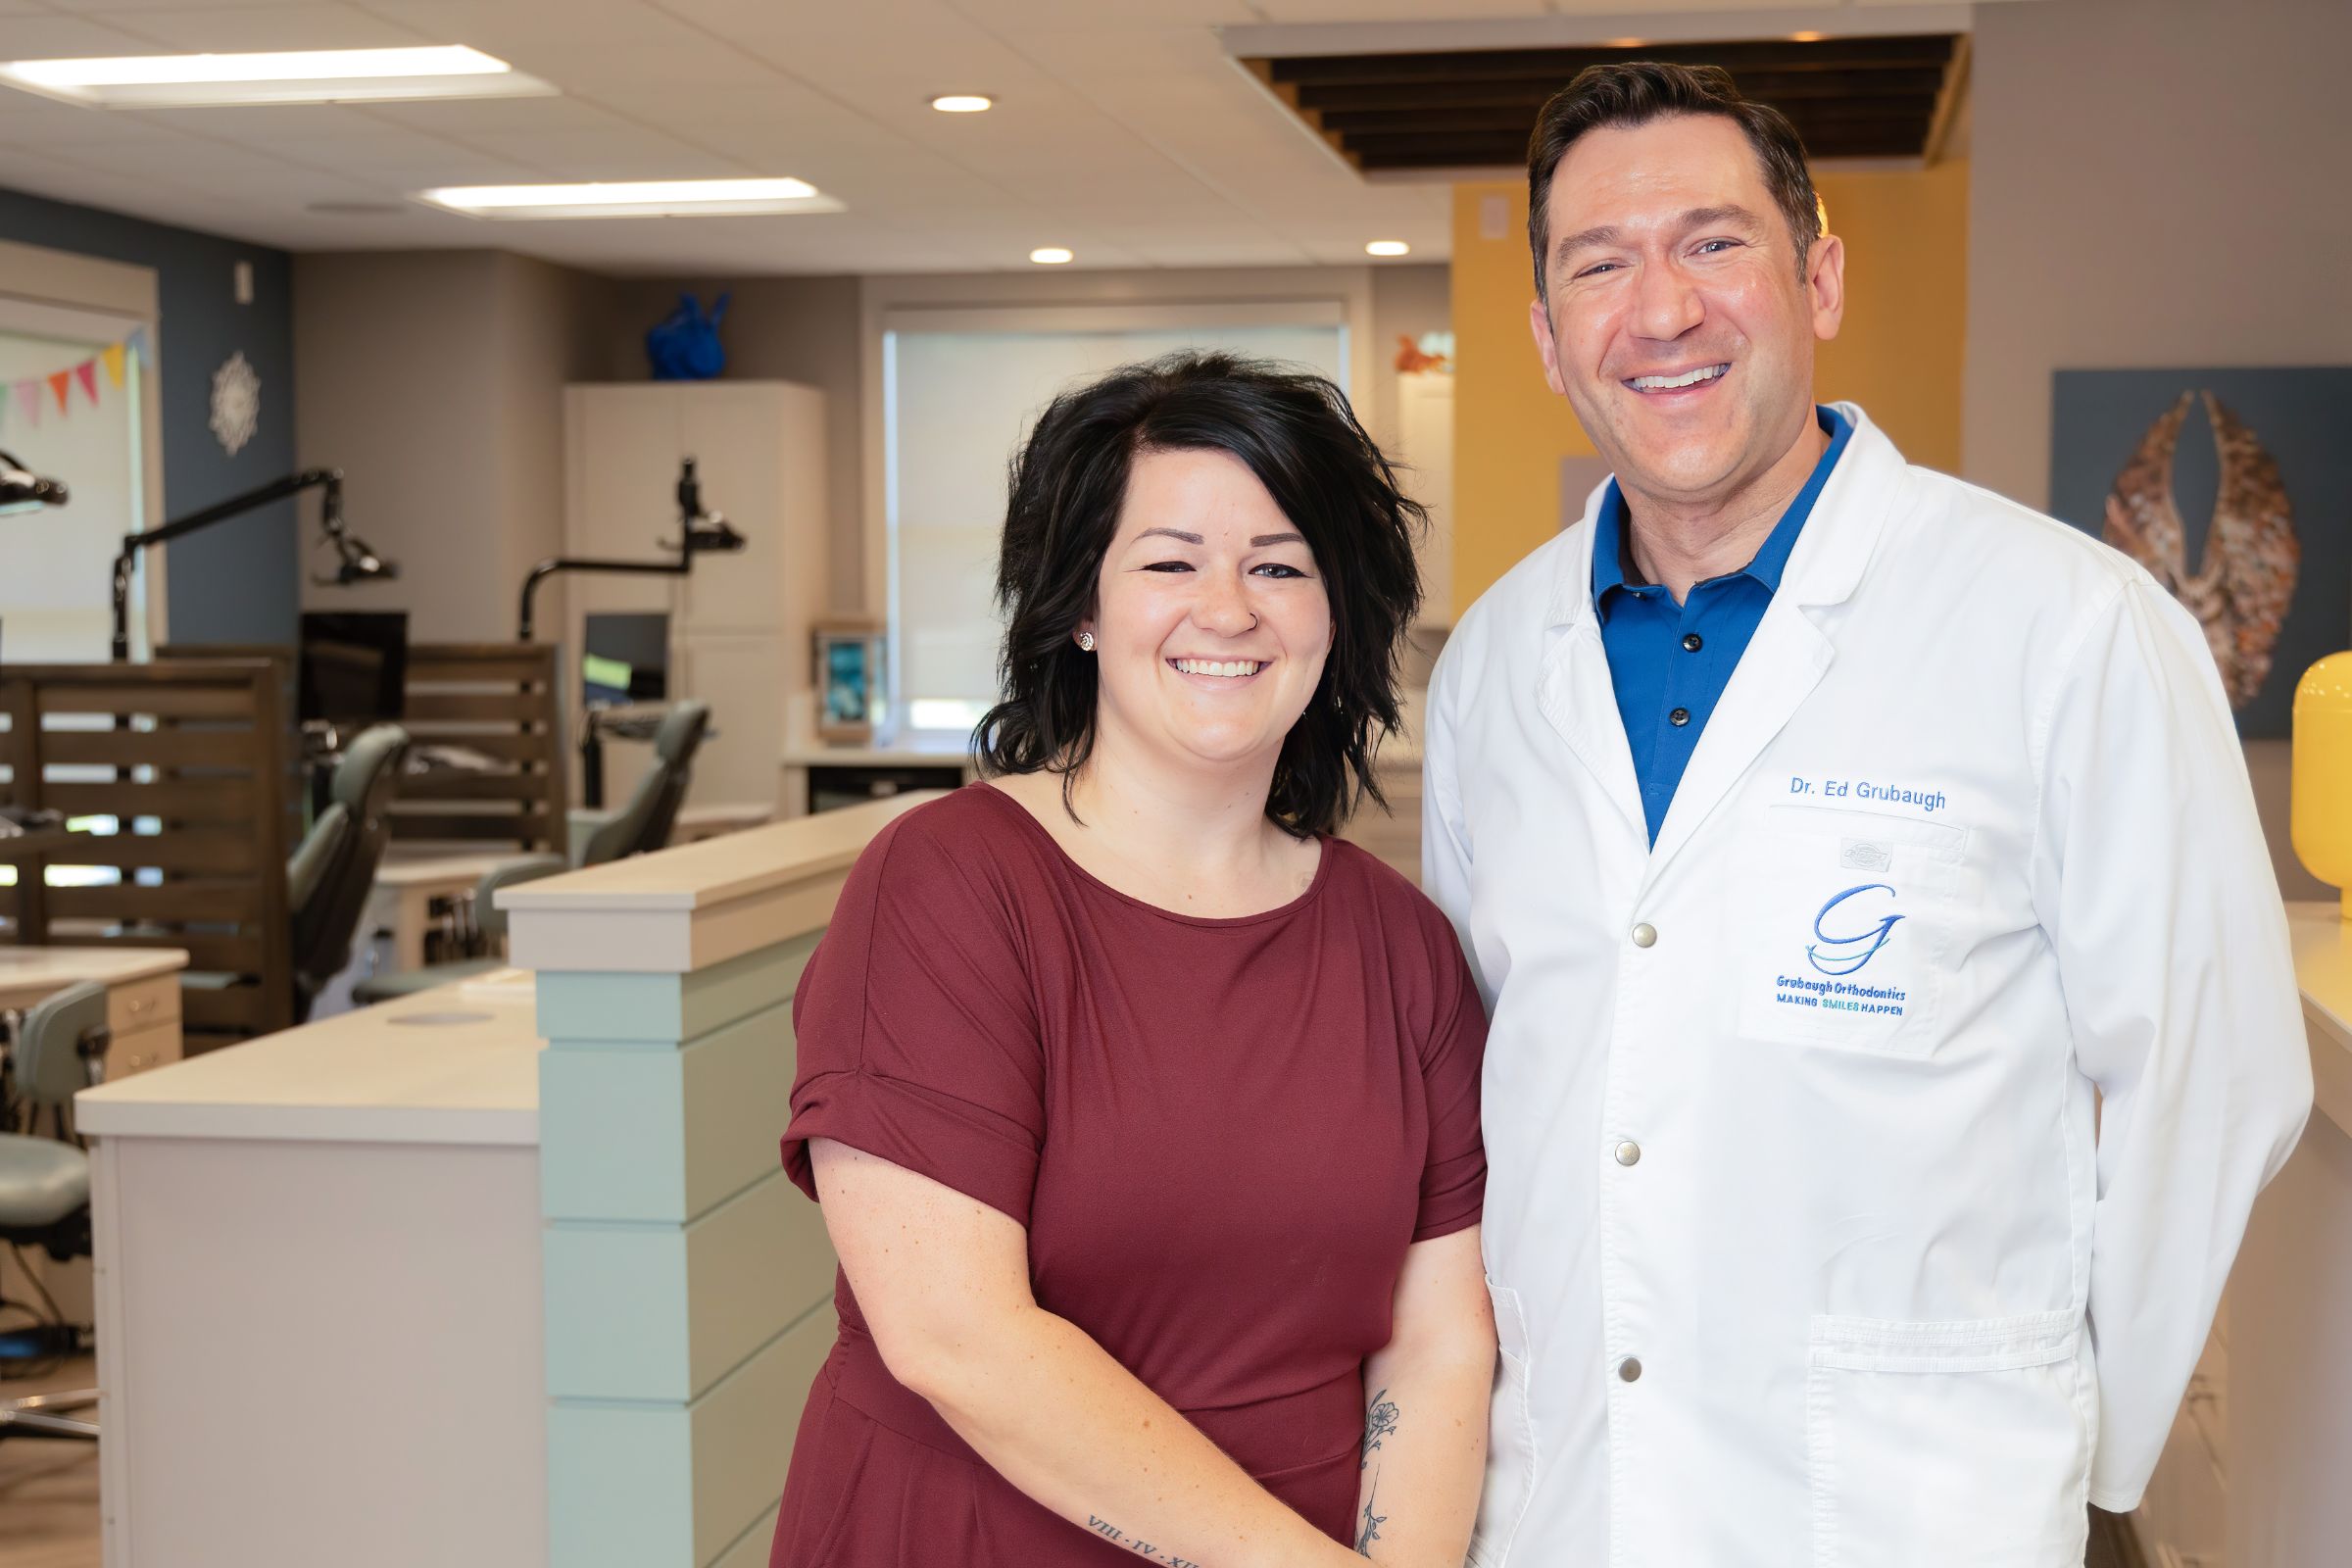 dr. grubaugh smiling with patient